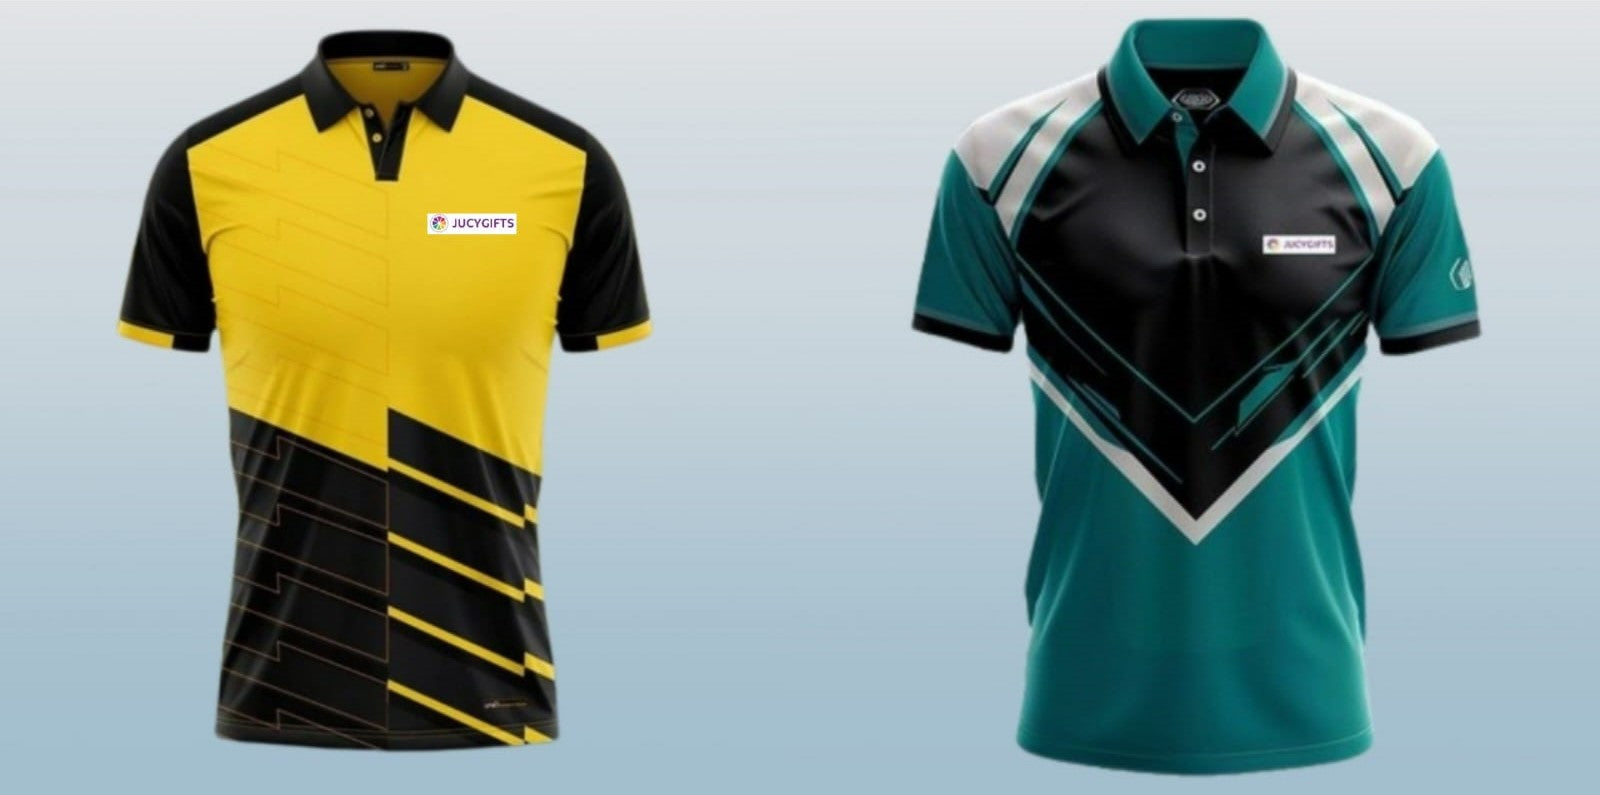 corporate tshirts for company's cricket league event